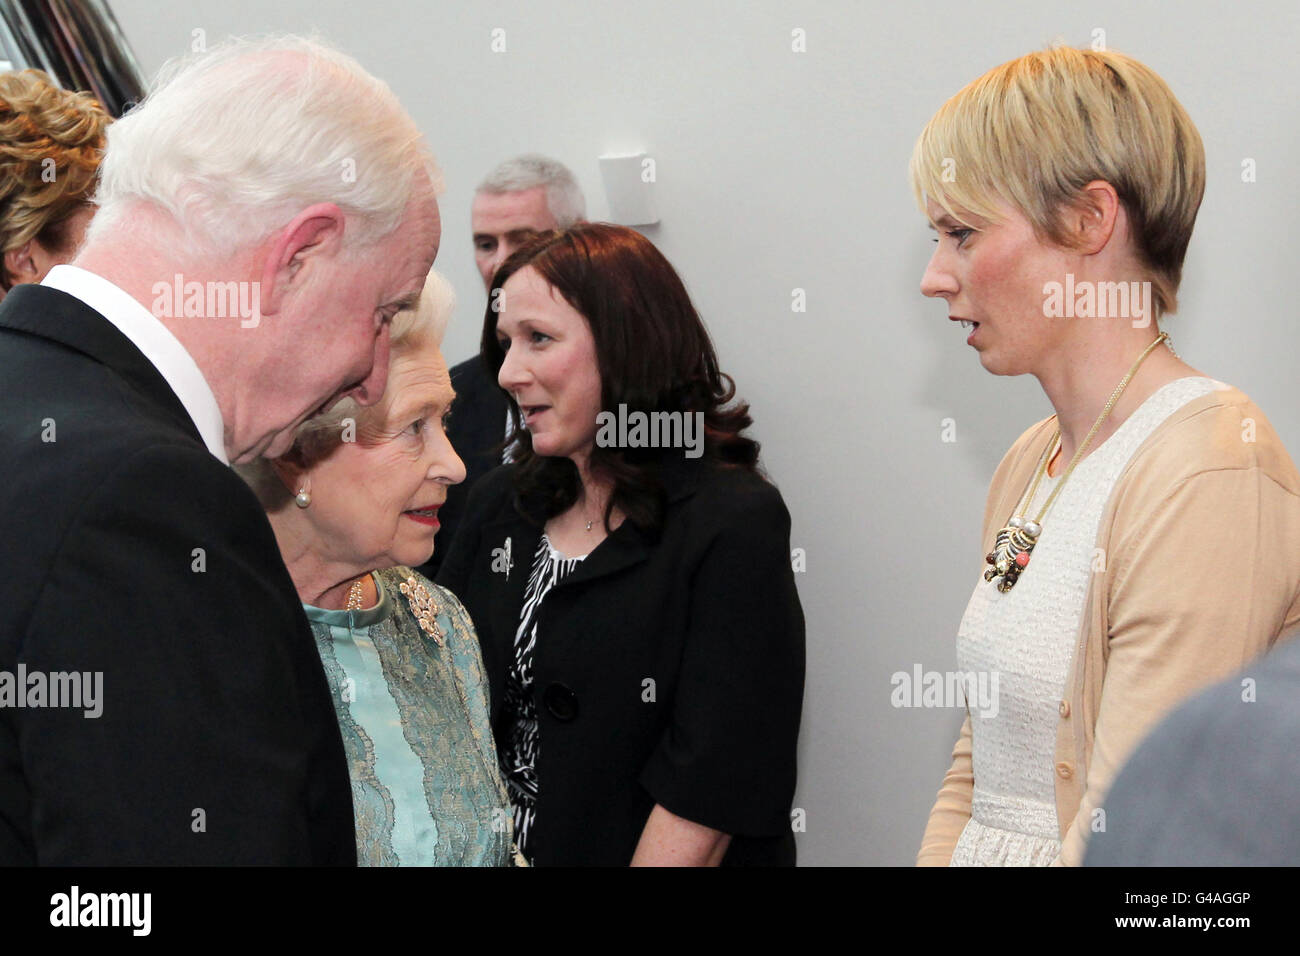 Queen Elizabeth II talks to Irish sprint hurdles athlete, Derval O'Rourke (right) at a reception and performance at the Dublin Convention Centre on the third day of the Queen's State visit to Ireland. Stock Photo